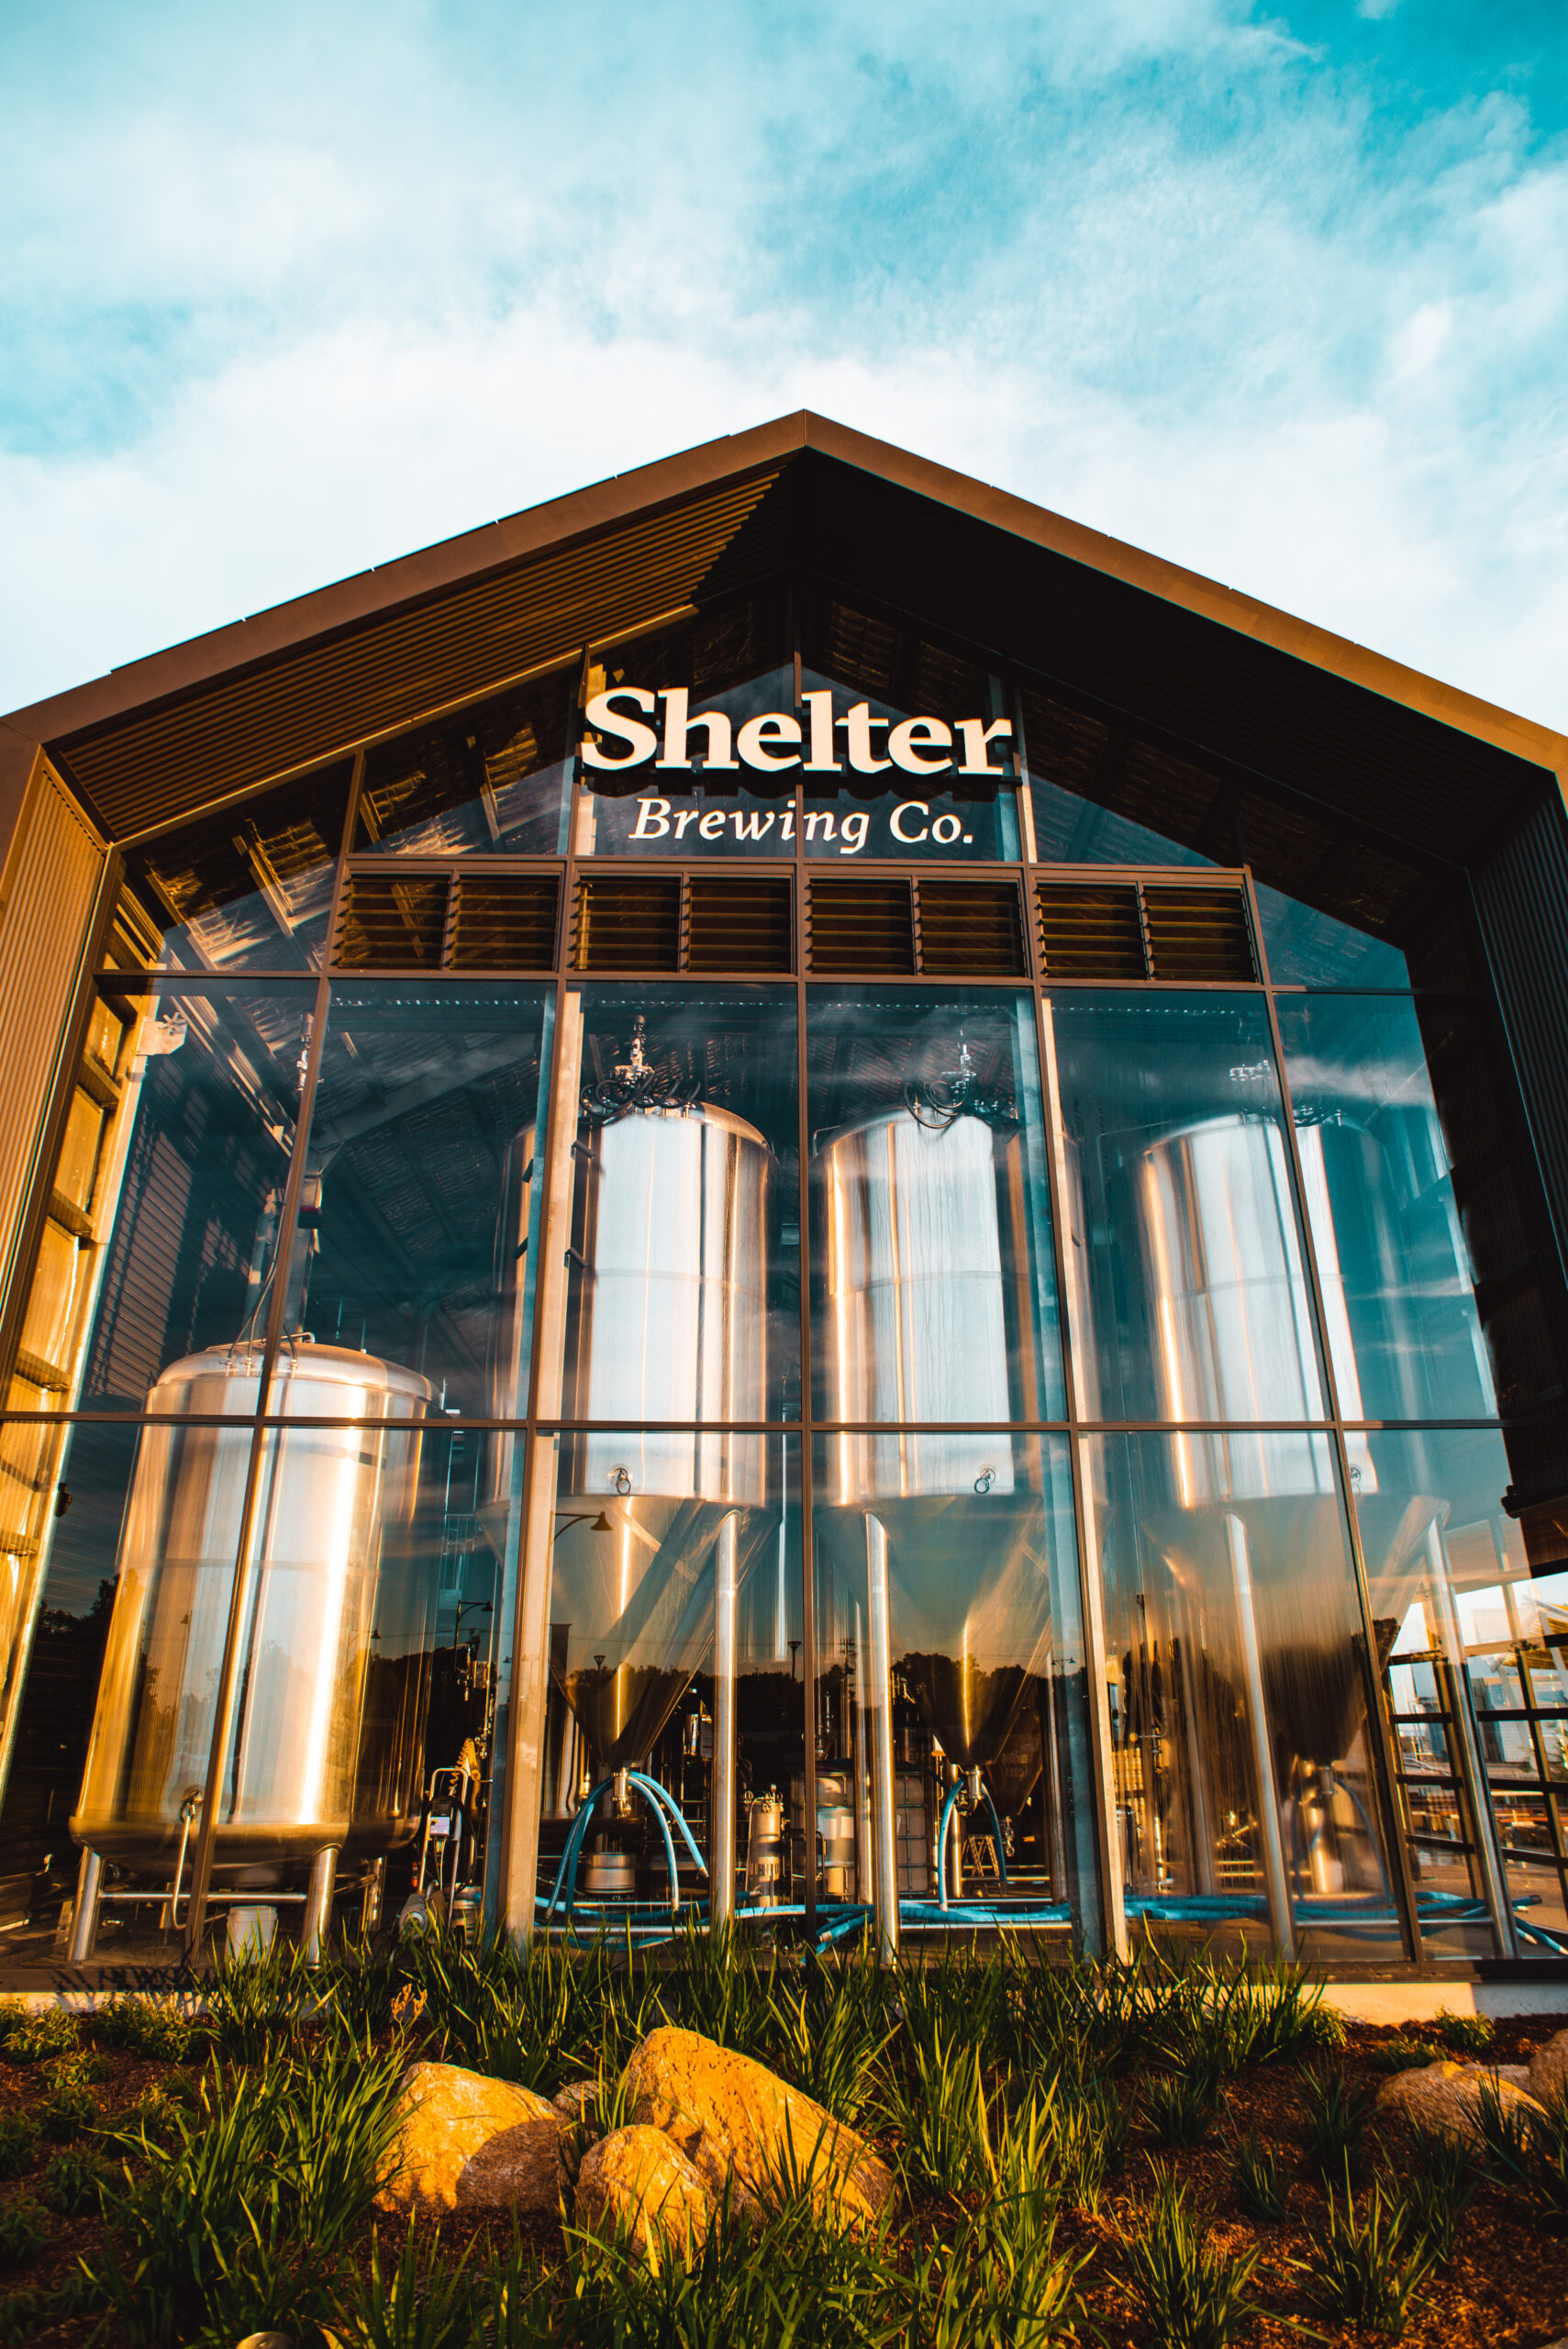 Shelter Brewing Co. Brewery Tour